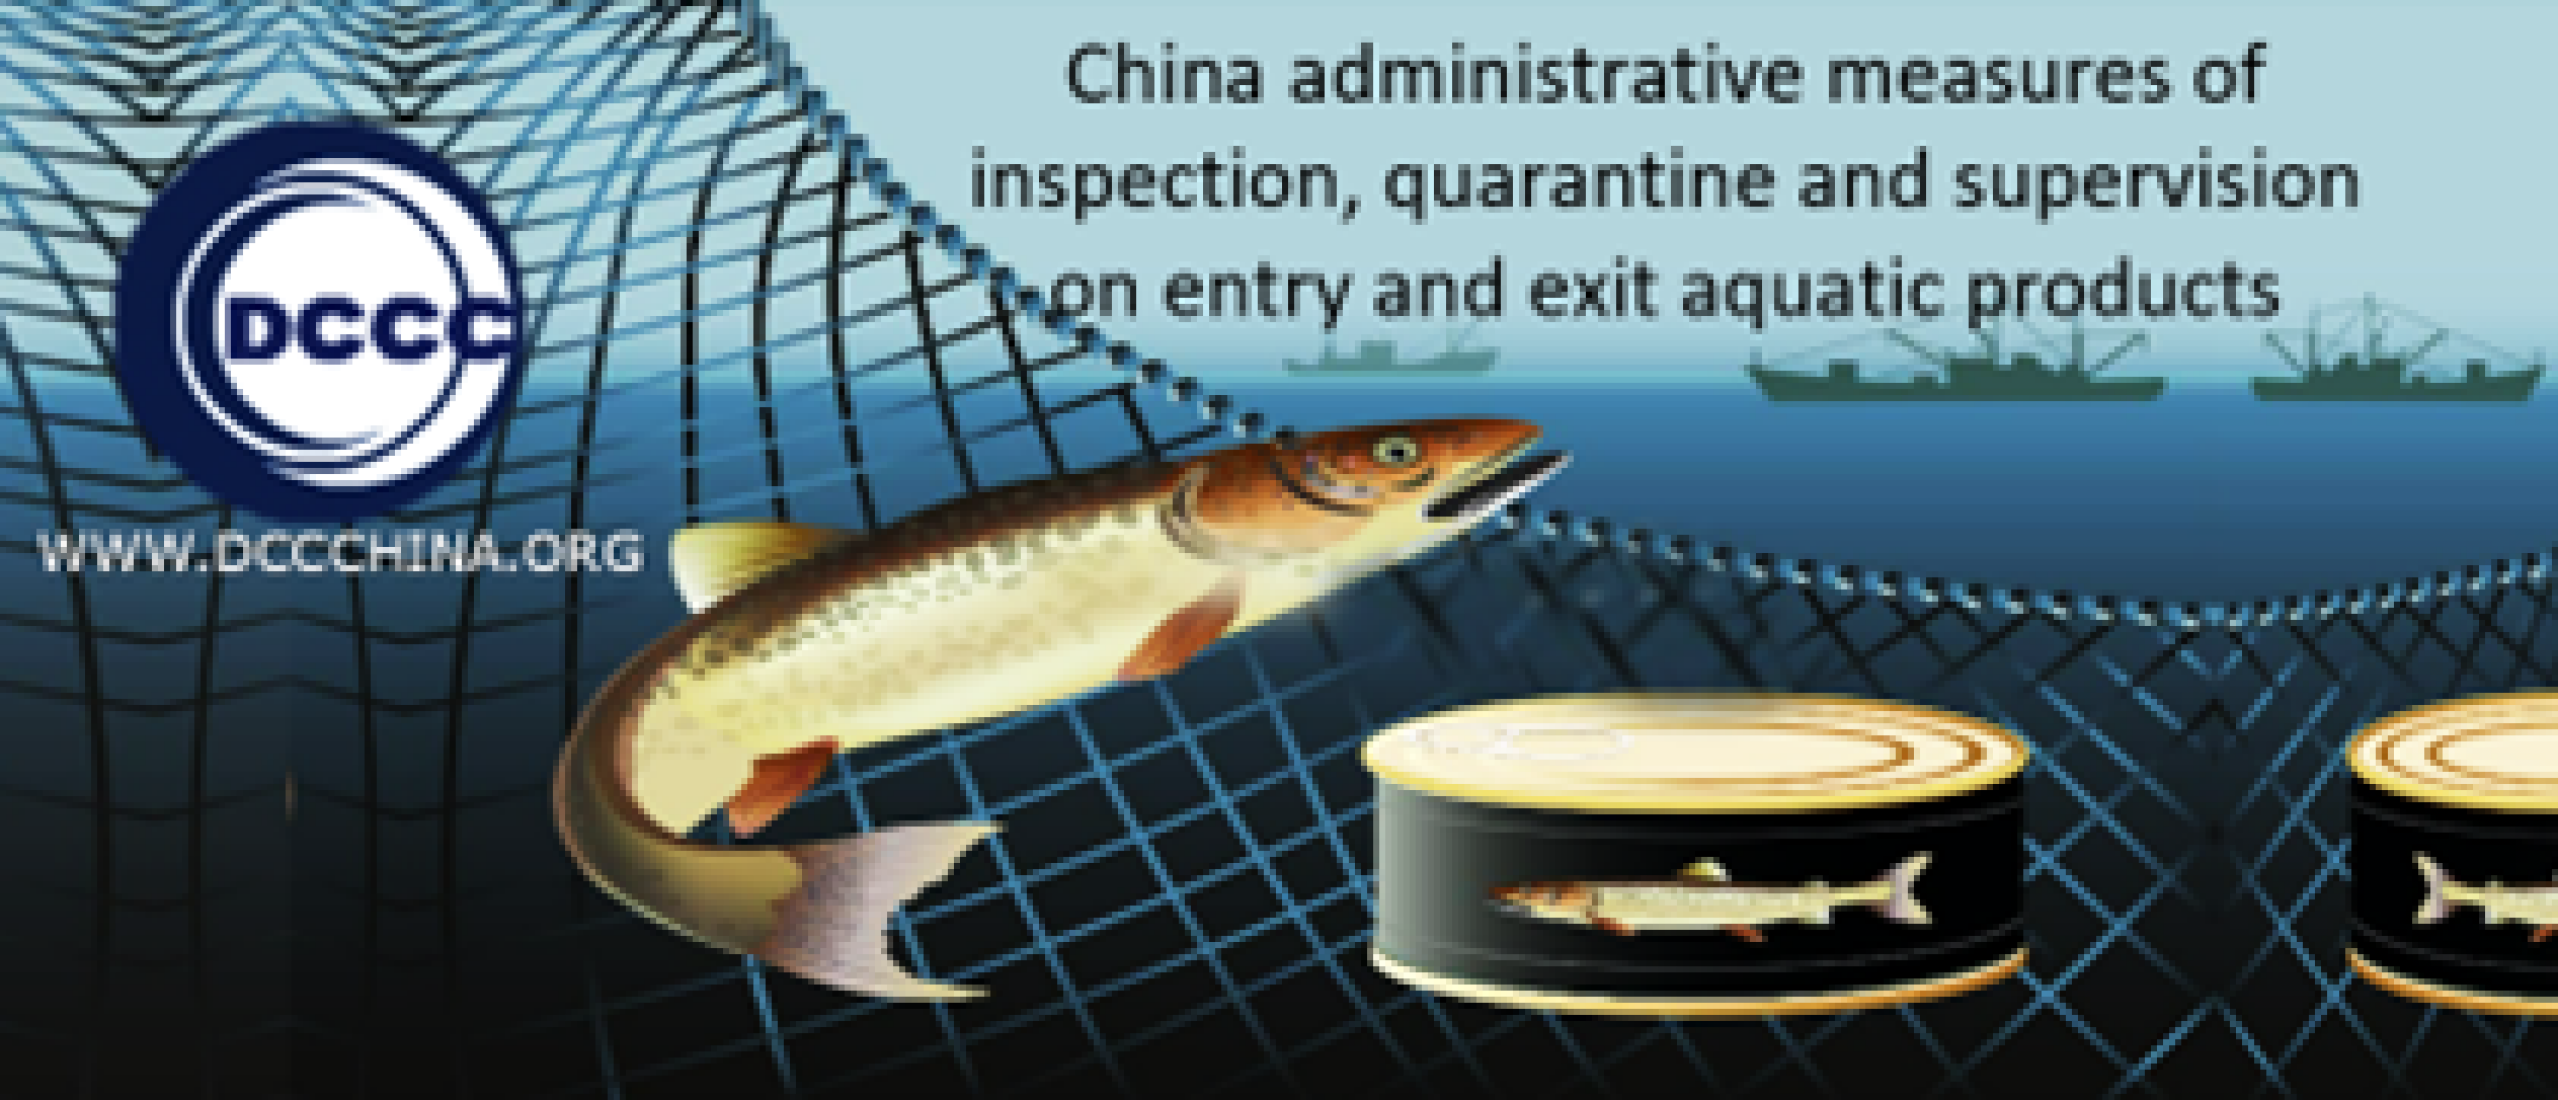 Administrative measures of inspection, quarantine and supervision on entry and exit aquatic products